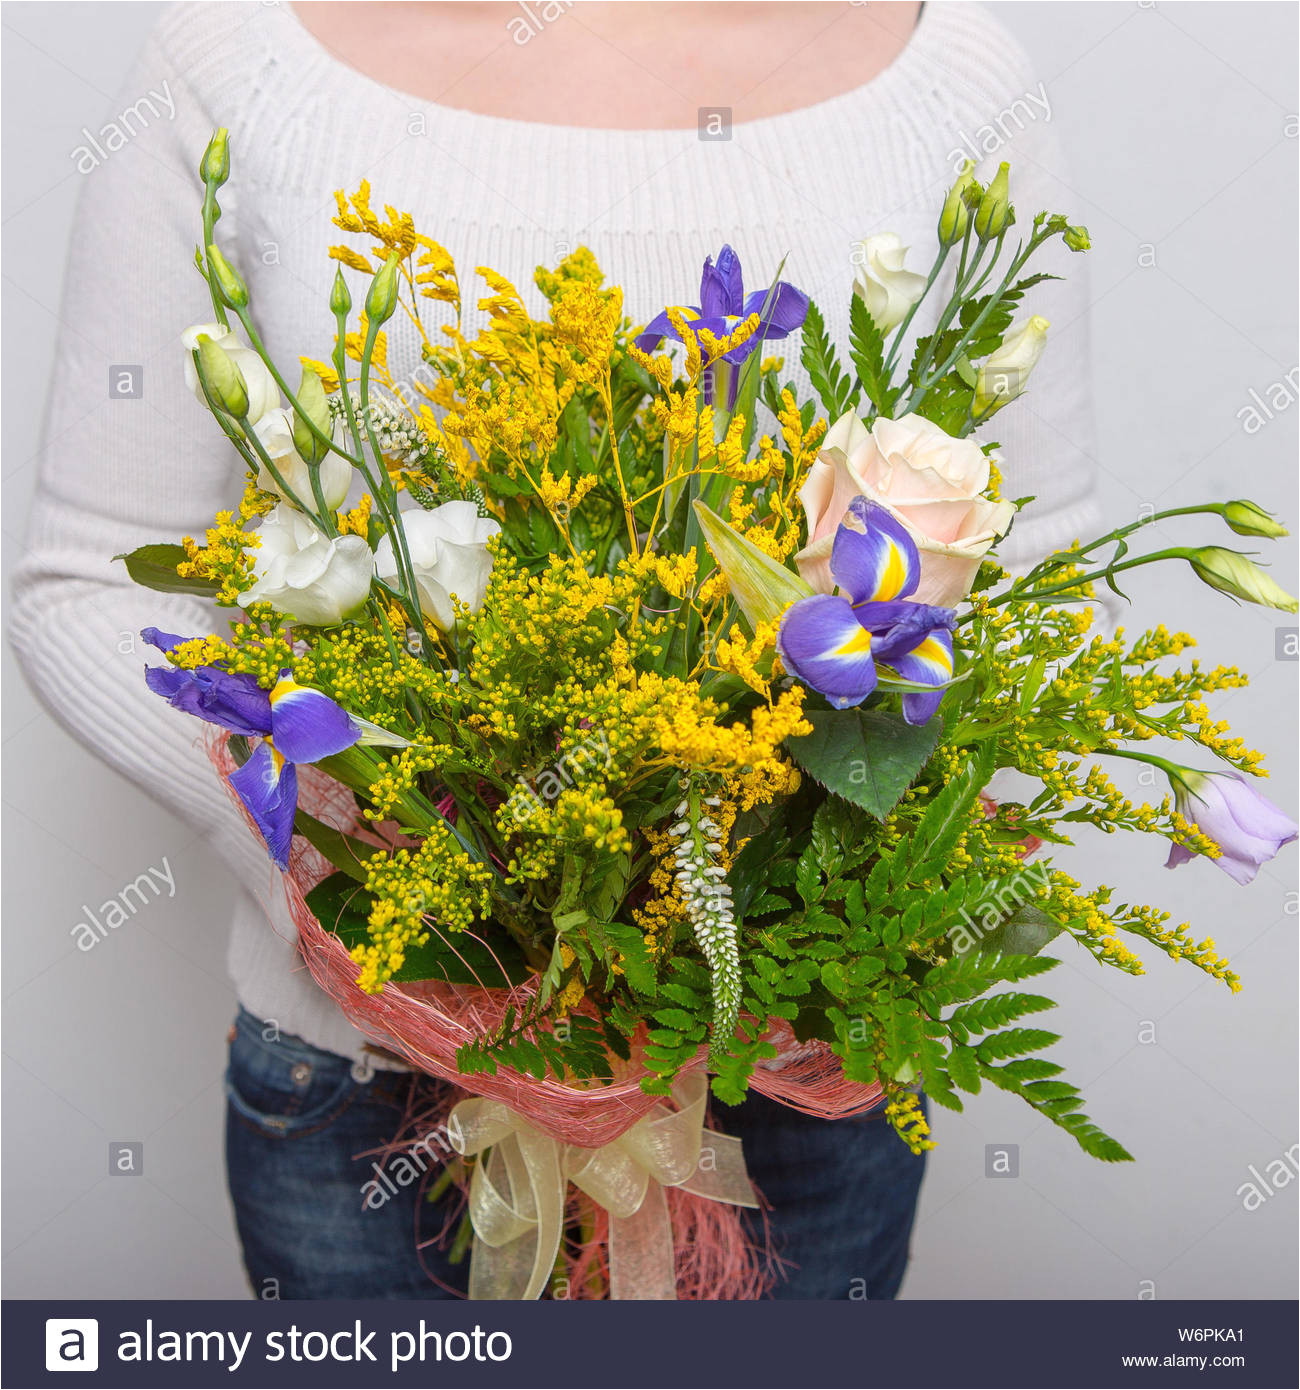 very nice florist woman holding a beautiful colourful blossoming flower bouquet leaves on white wall background w6pka1 jpg